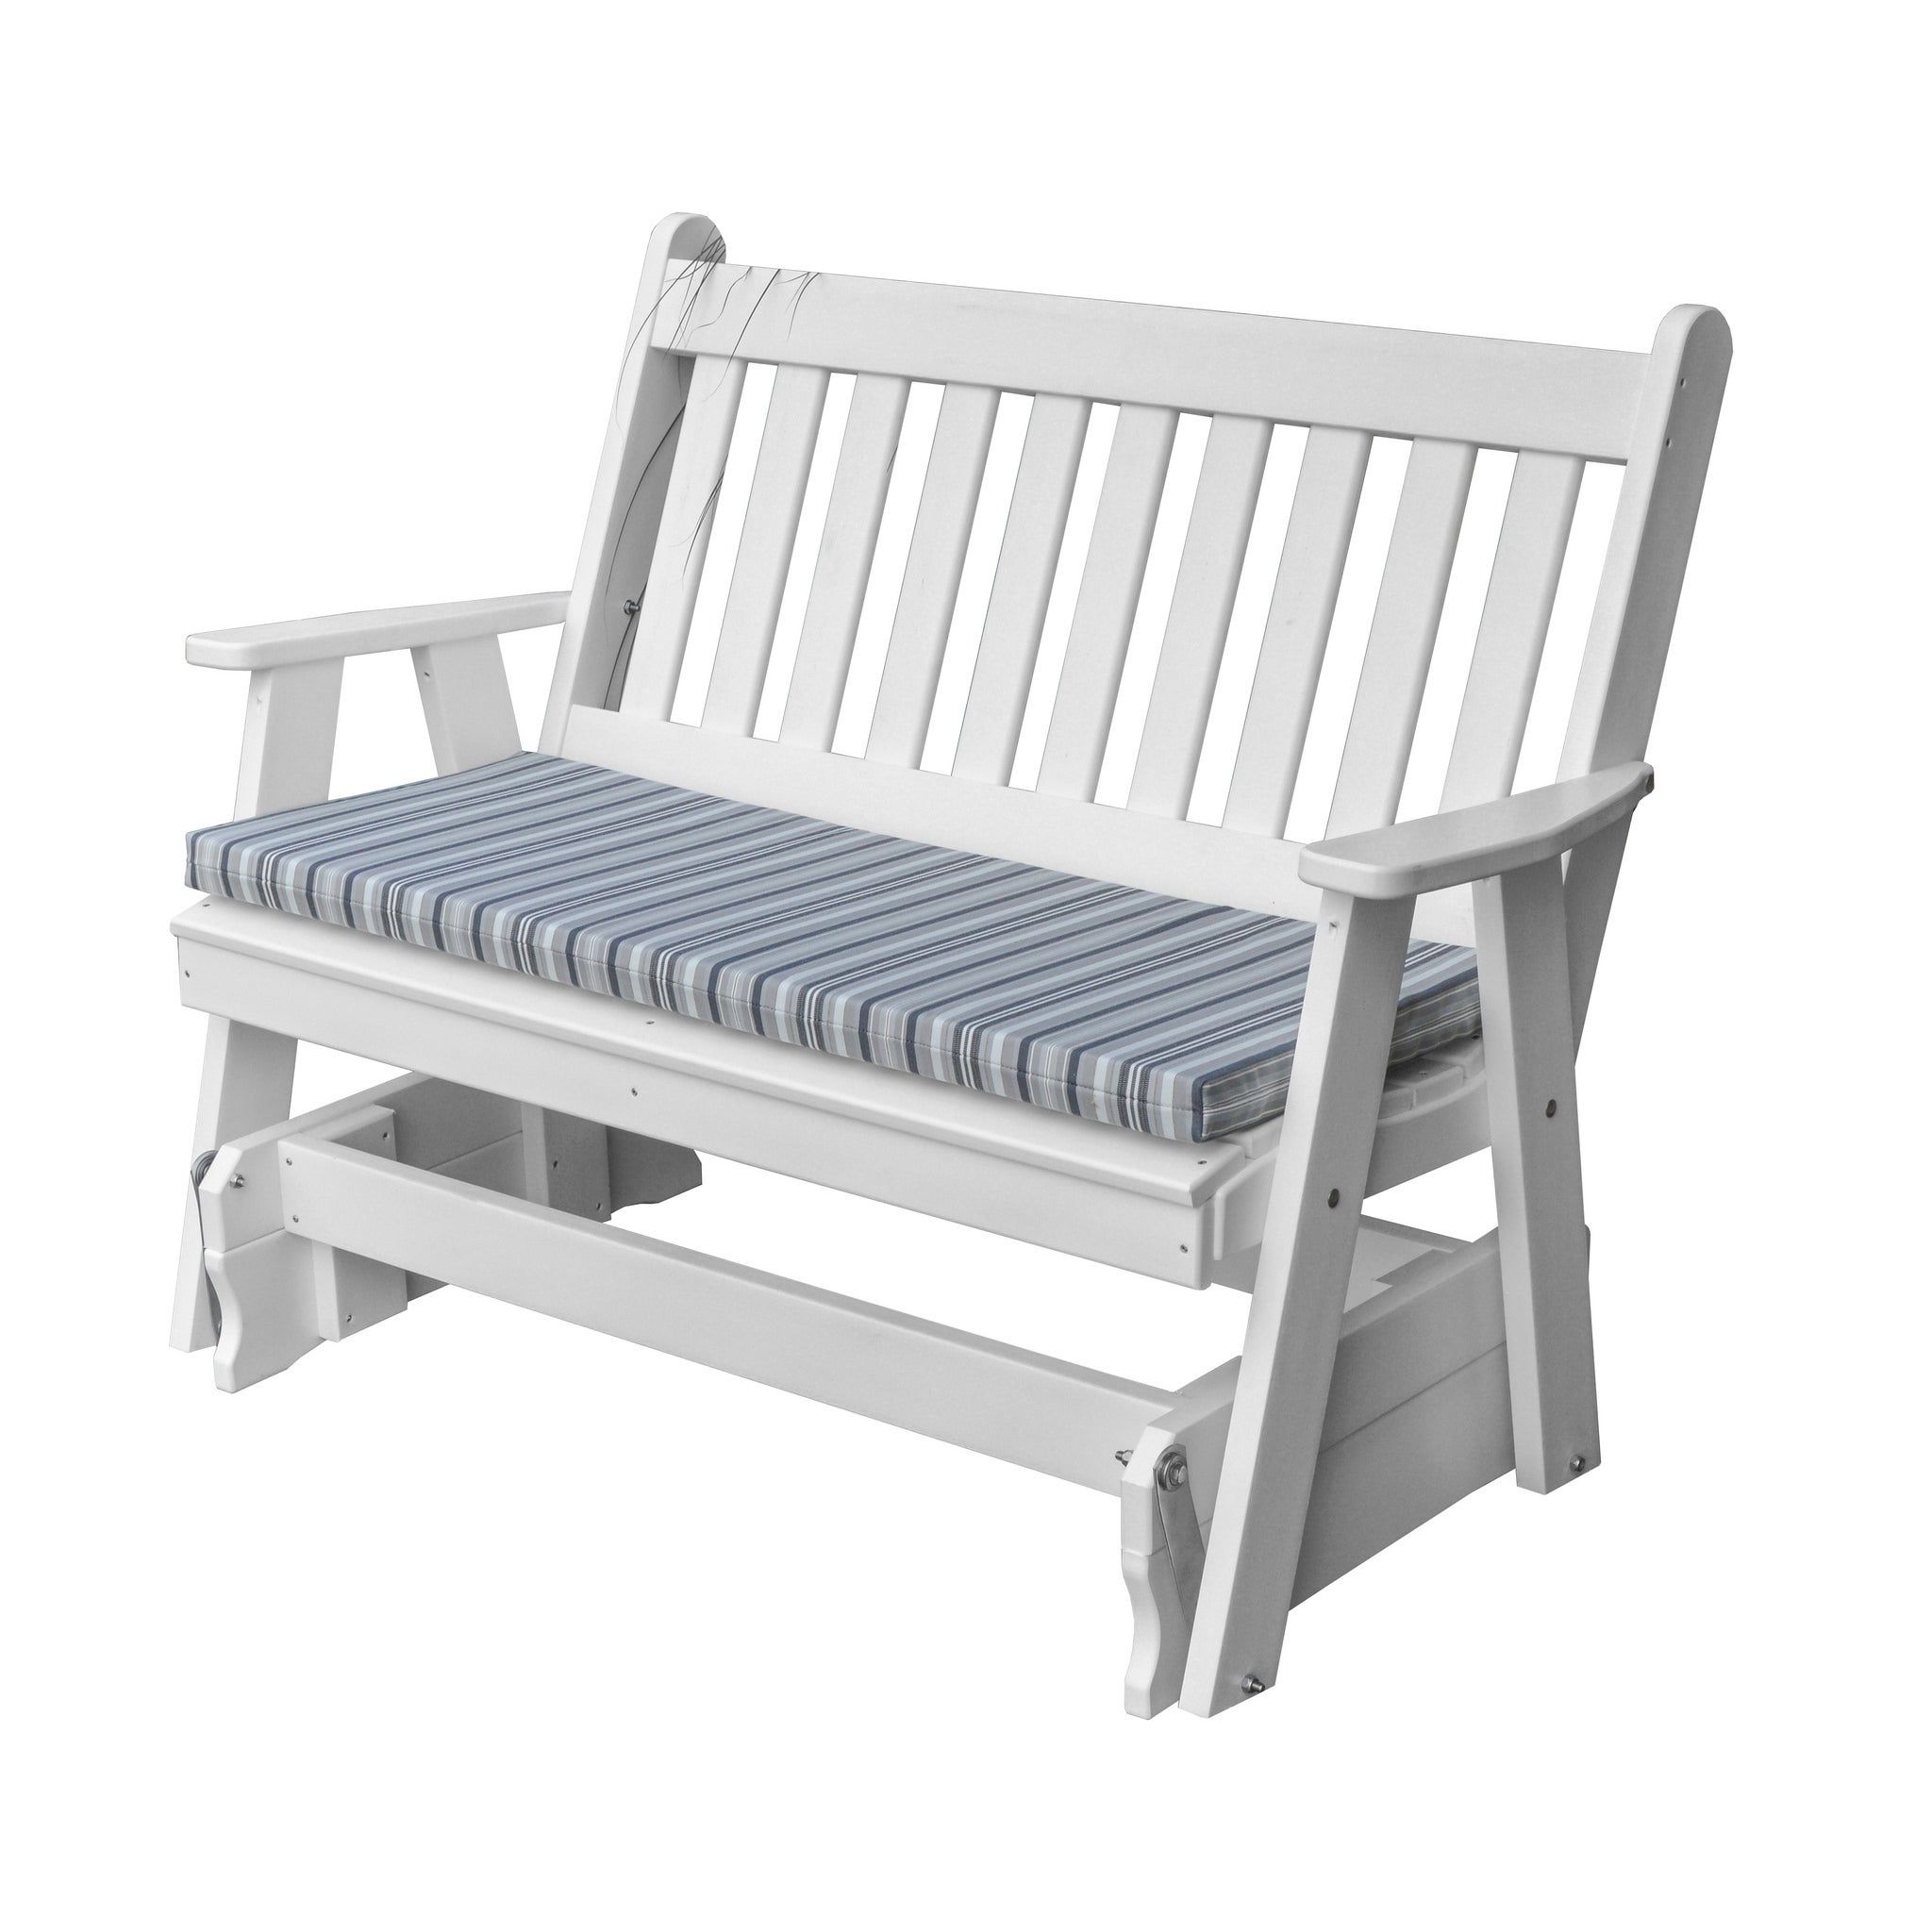 Traditional Glider Benches With Regard To Most Current Outdoor 5 Foot Glider In Traditional English Style – Recycled Plastic (View 30 of 30)